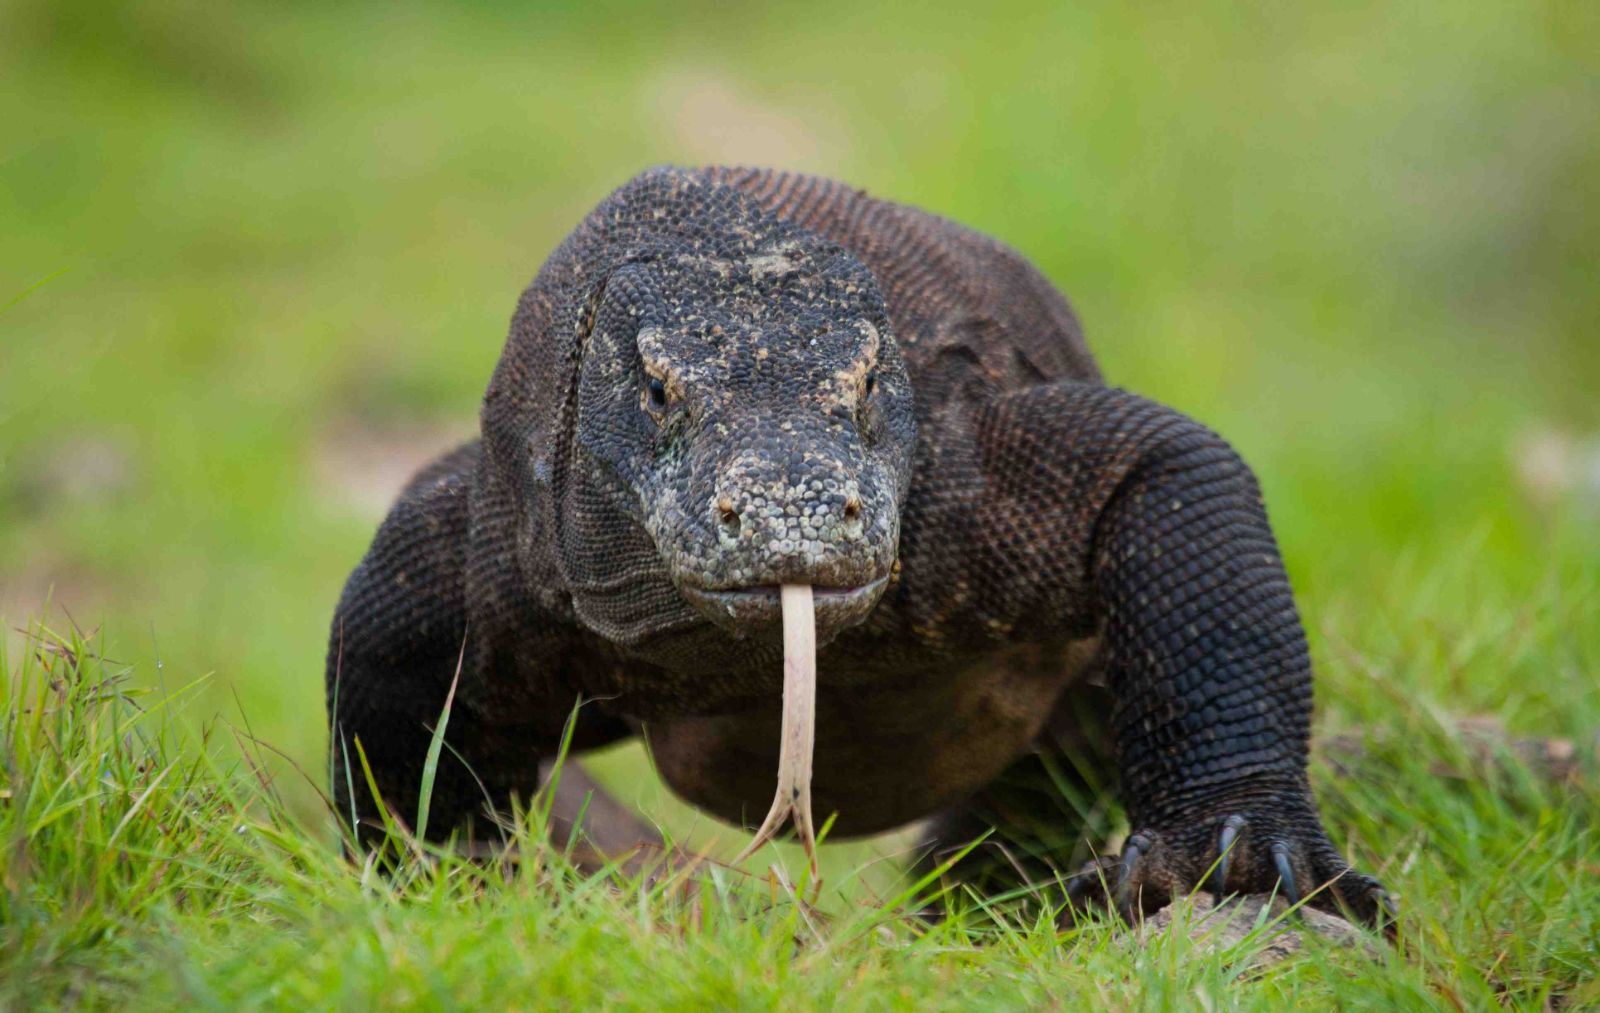 A Komodo dragon spotted in Indonesia